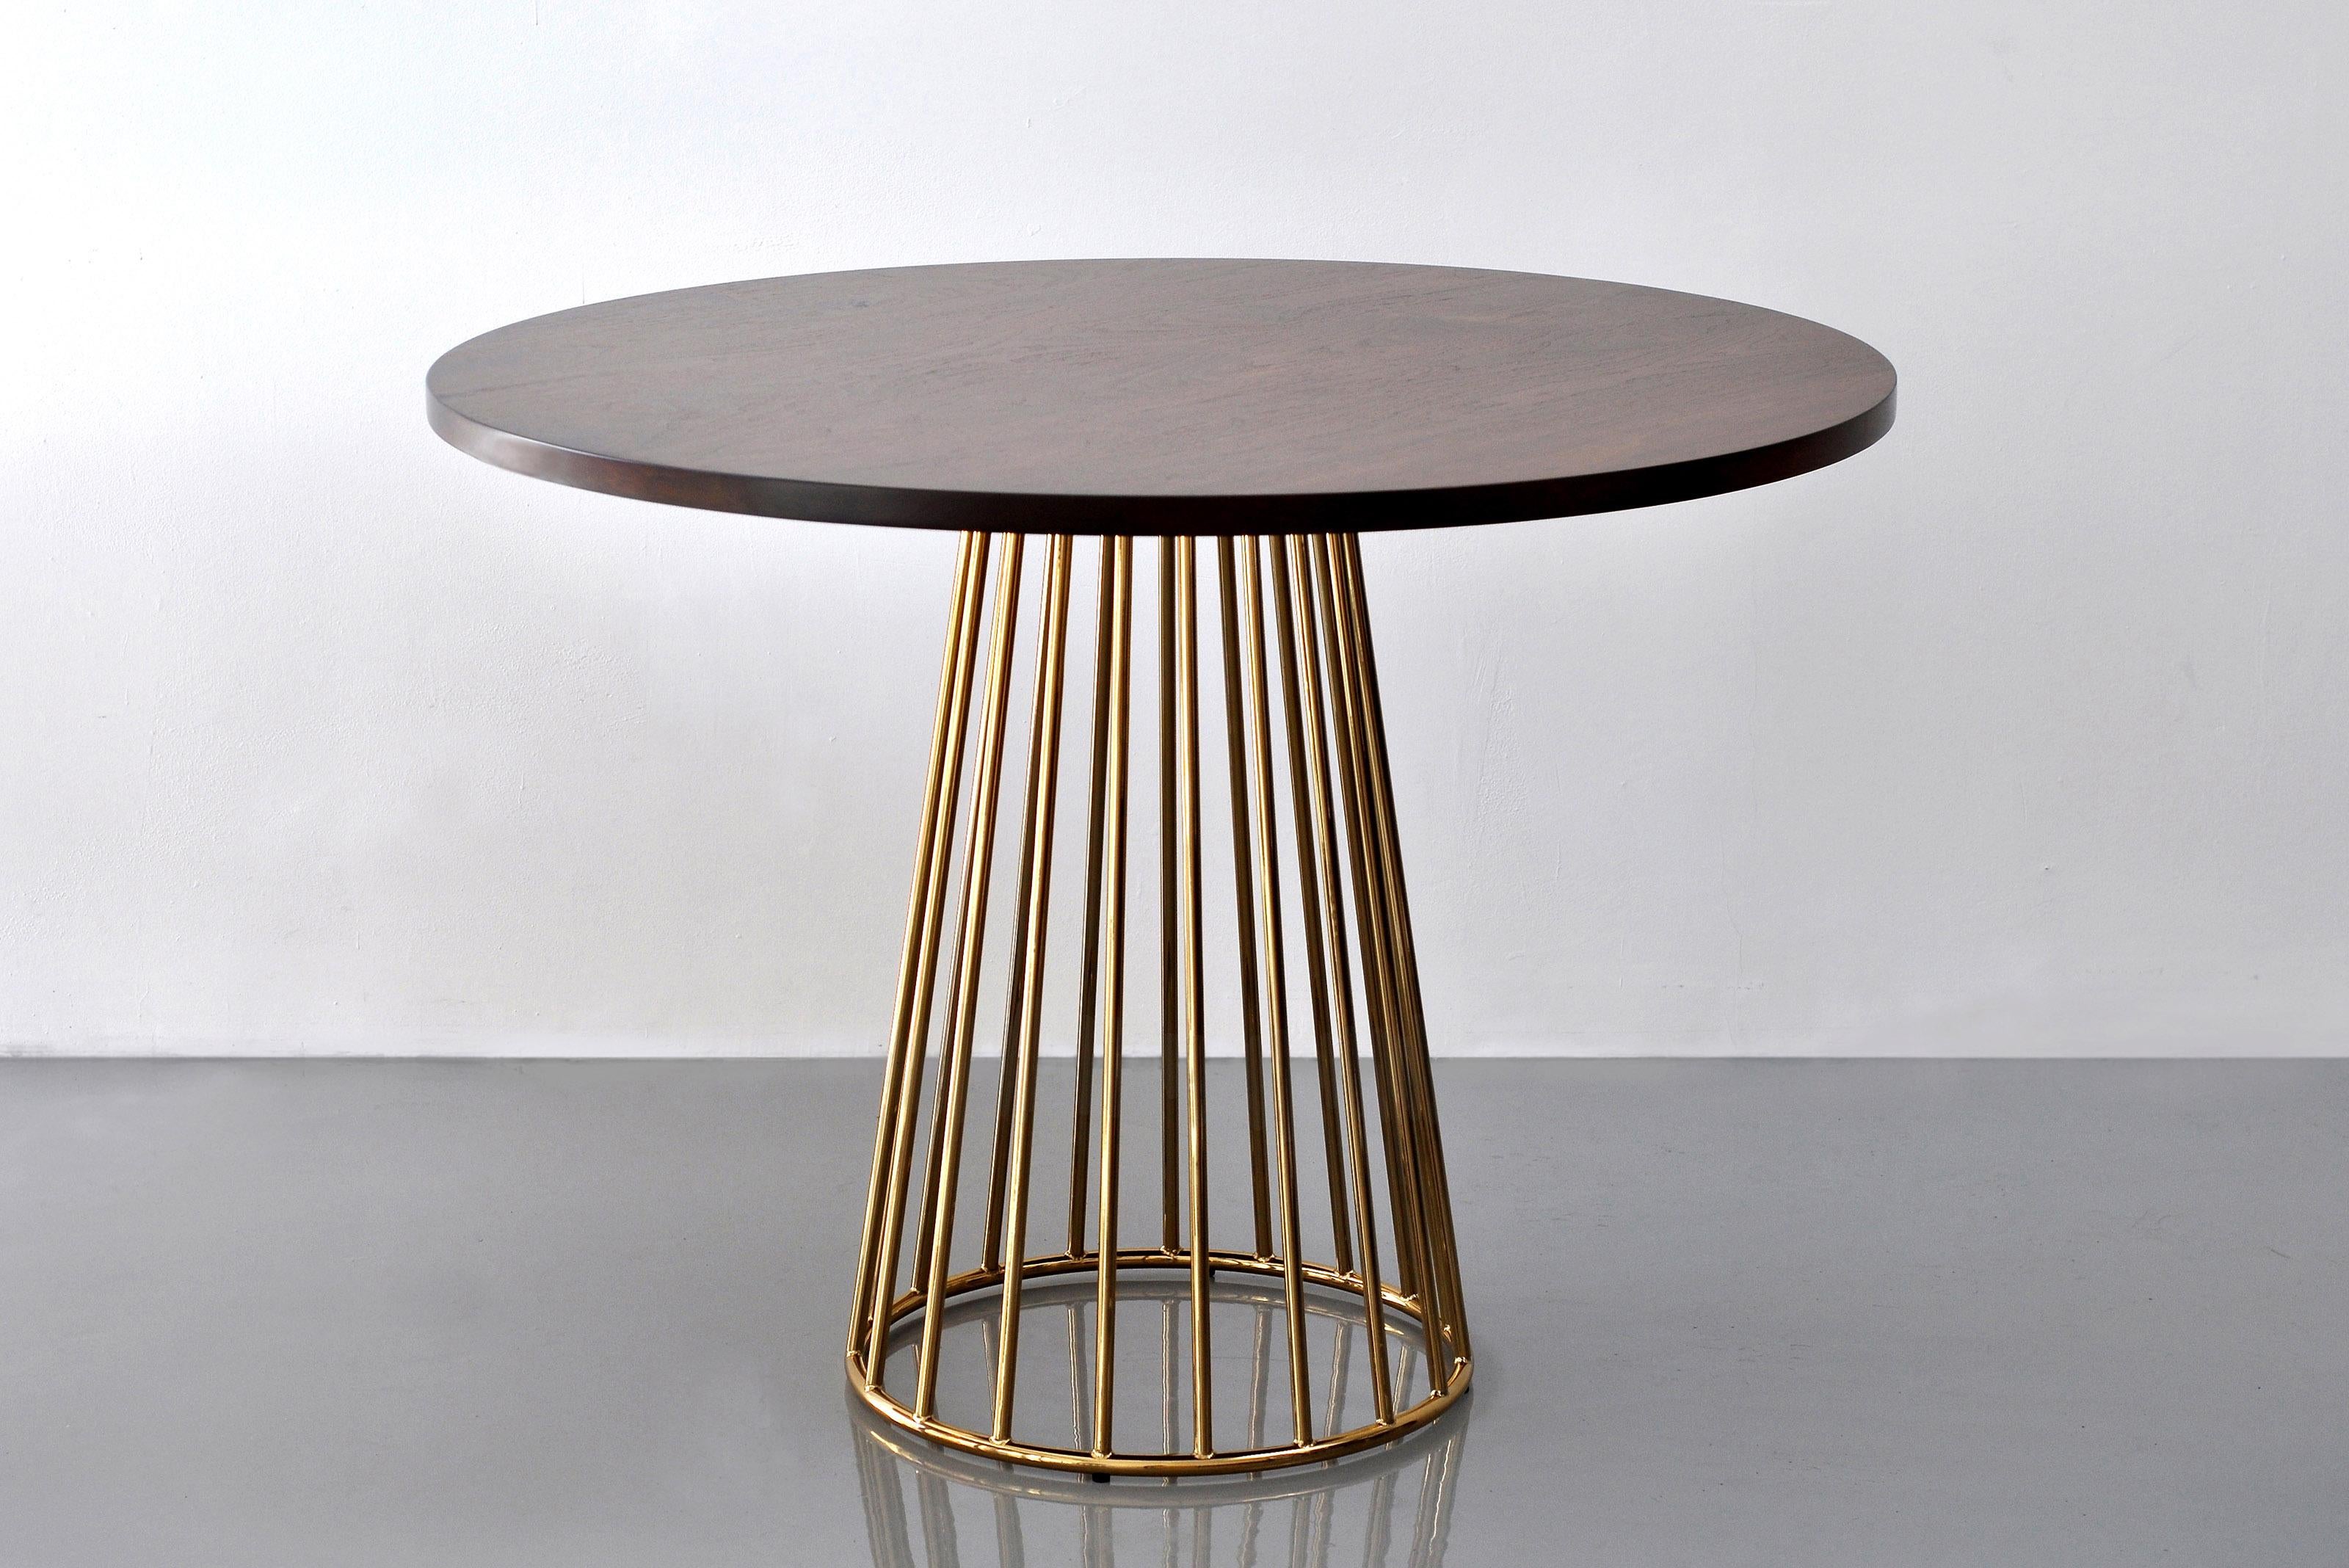 Wired Café Table by Phase Design
Dimensions: Ø 101.6 x H 73.7 cm. 
Materials: Smoked brass and walnut.

Solid steel bar with marble or solid wooden tops. Steel bar available in gloss or flat white and black powder coat, polished chrome, burnt